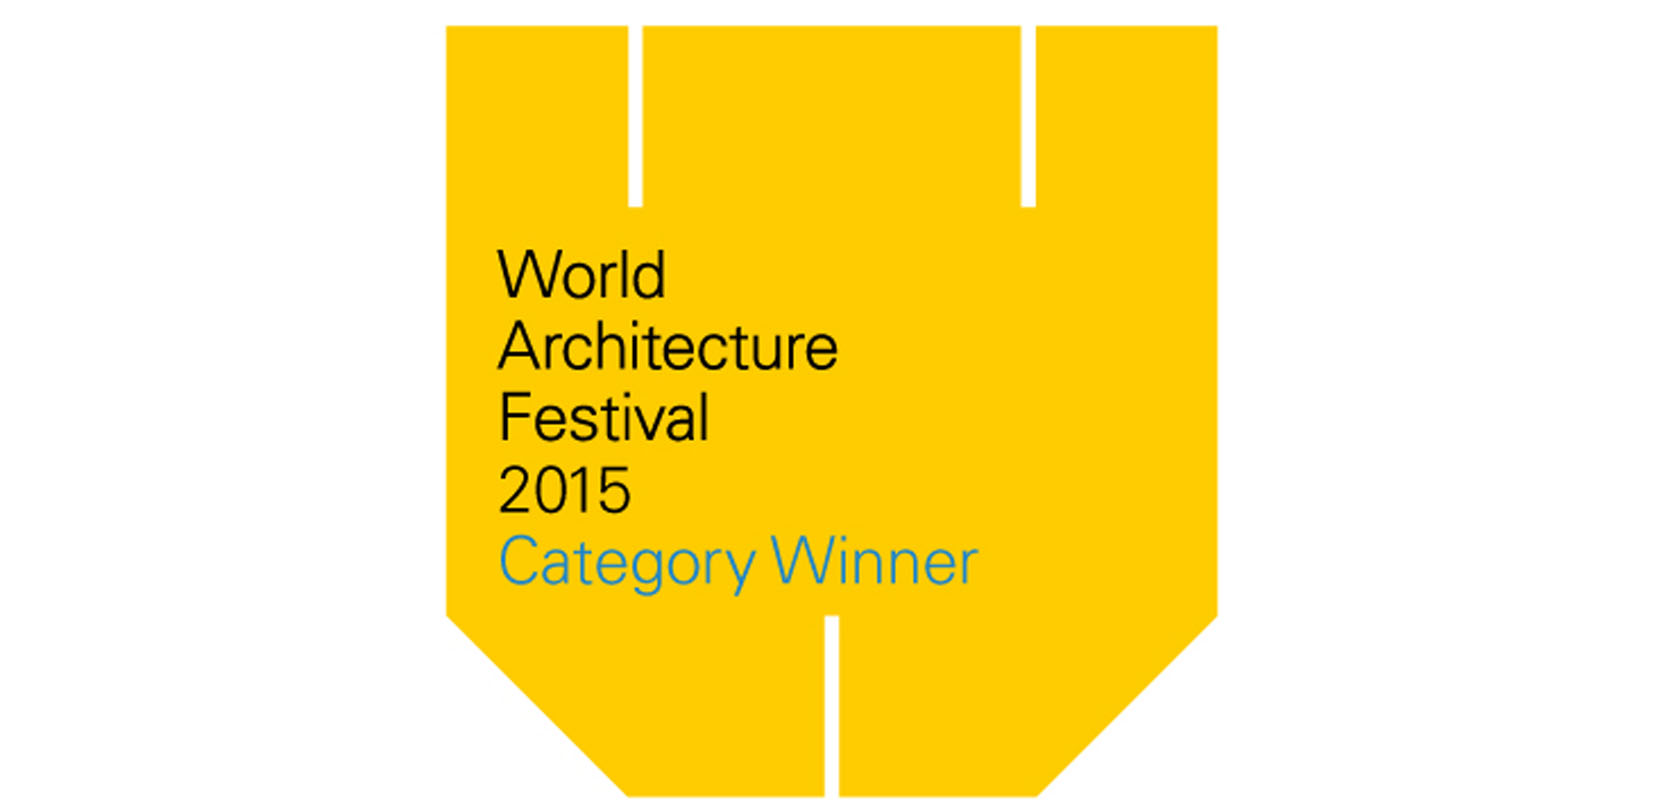 EAA – EMRE AROLAT ARCHITECTURE | Two Category Wins For Eaa On Waf's First Day